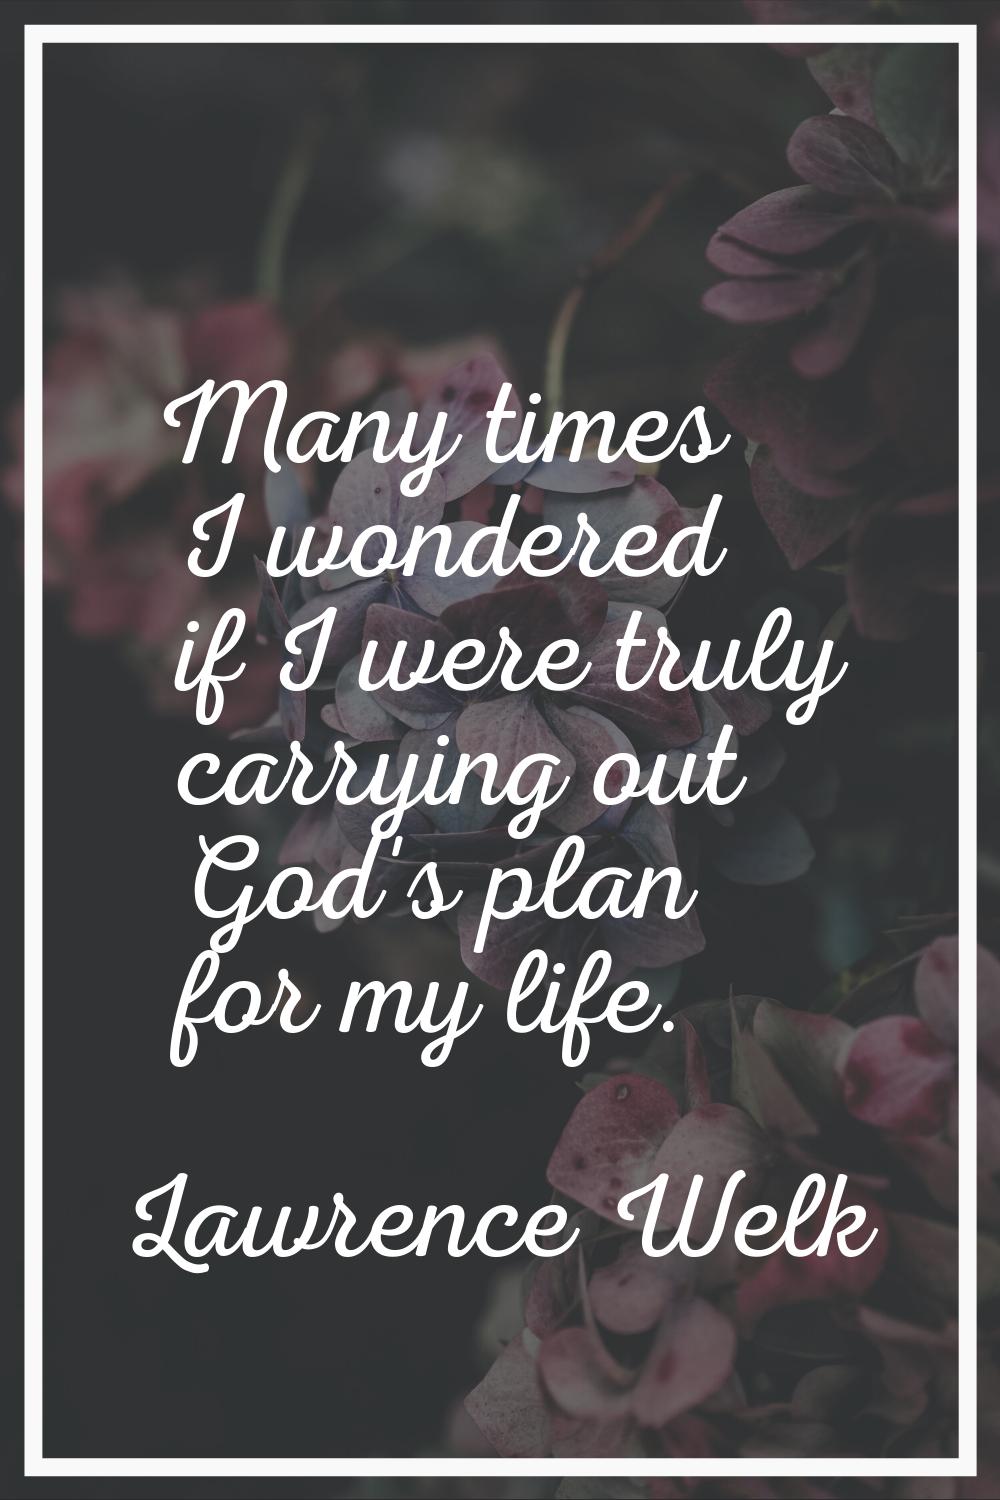 Many times I wondered if I were truly carrying out God's plan for my life.